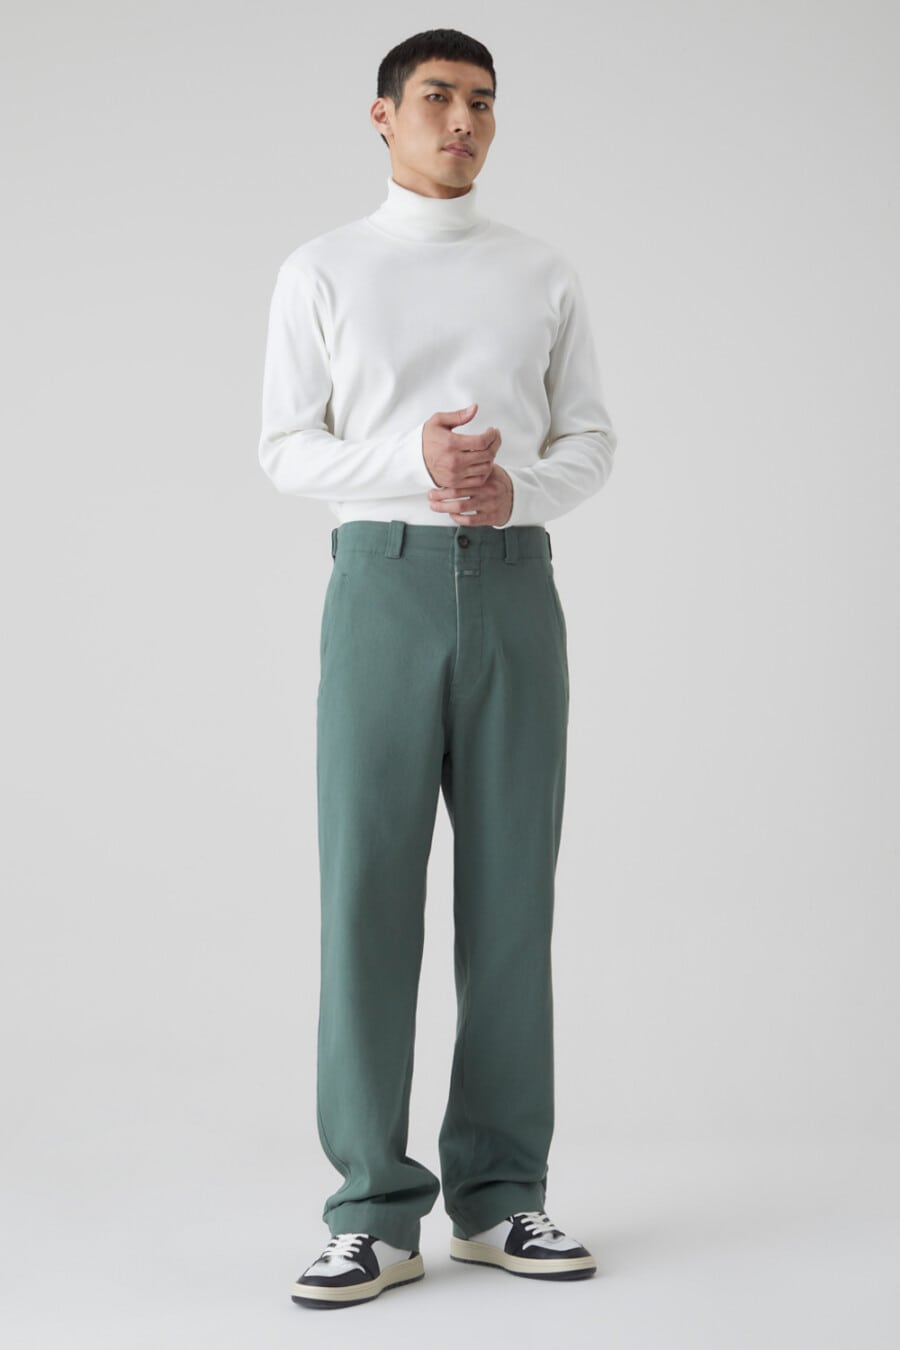 Men's green wide-leg pants, tucked in white turtleneck and black and white chunky sneakers outfit